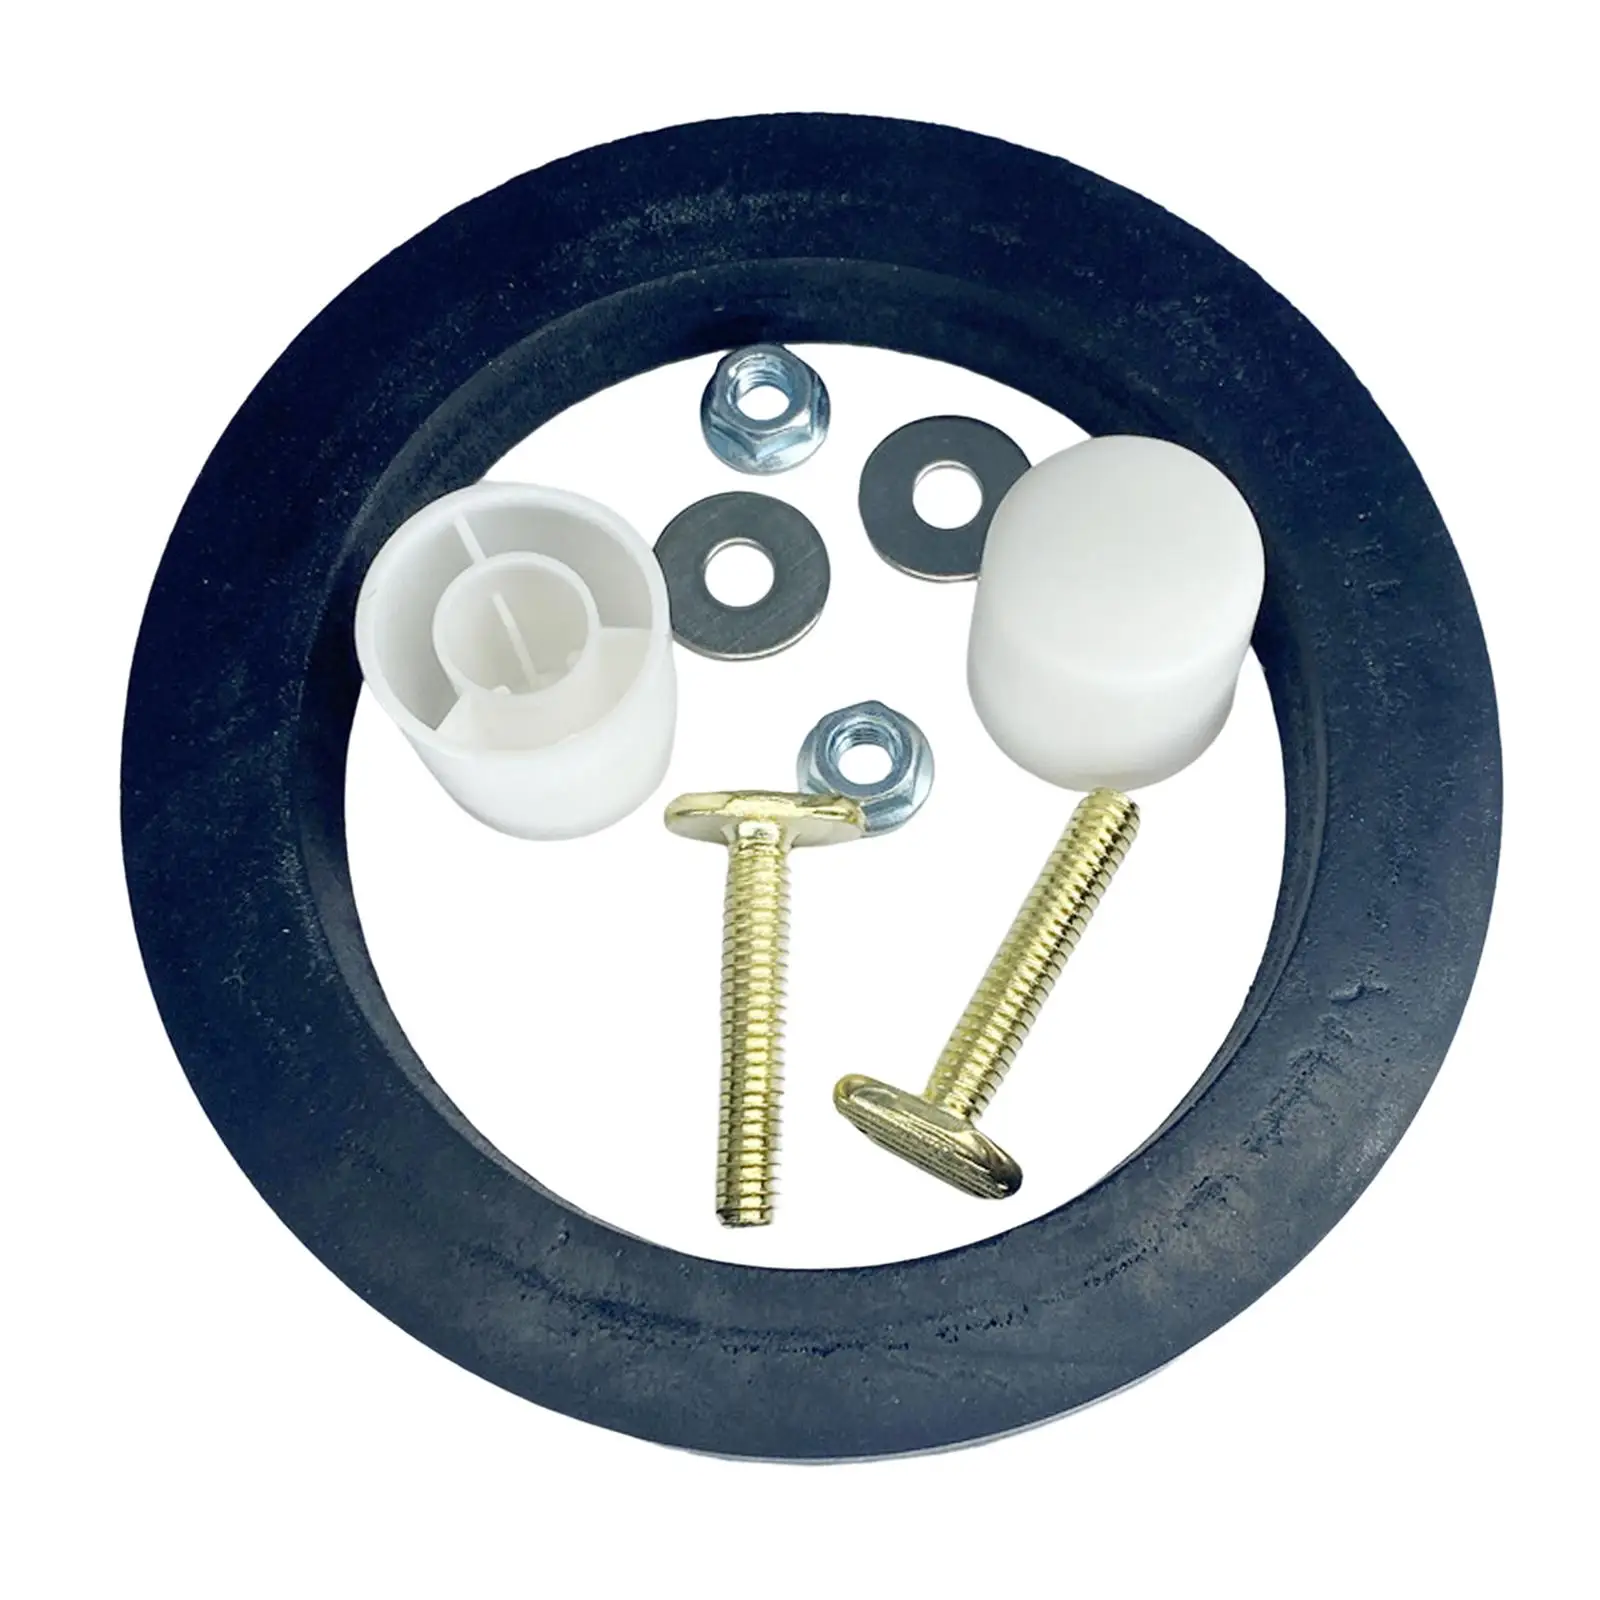 Seal Gasket of RV Toilet for Toilet Easy to Install Accessories Professional Lightweight Easily Install Durable